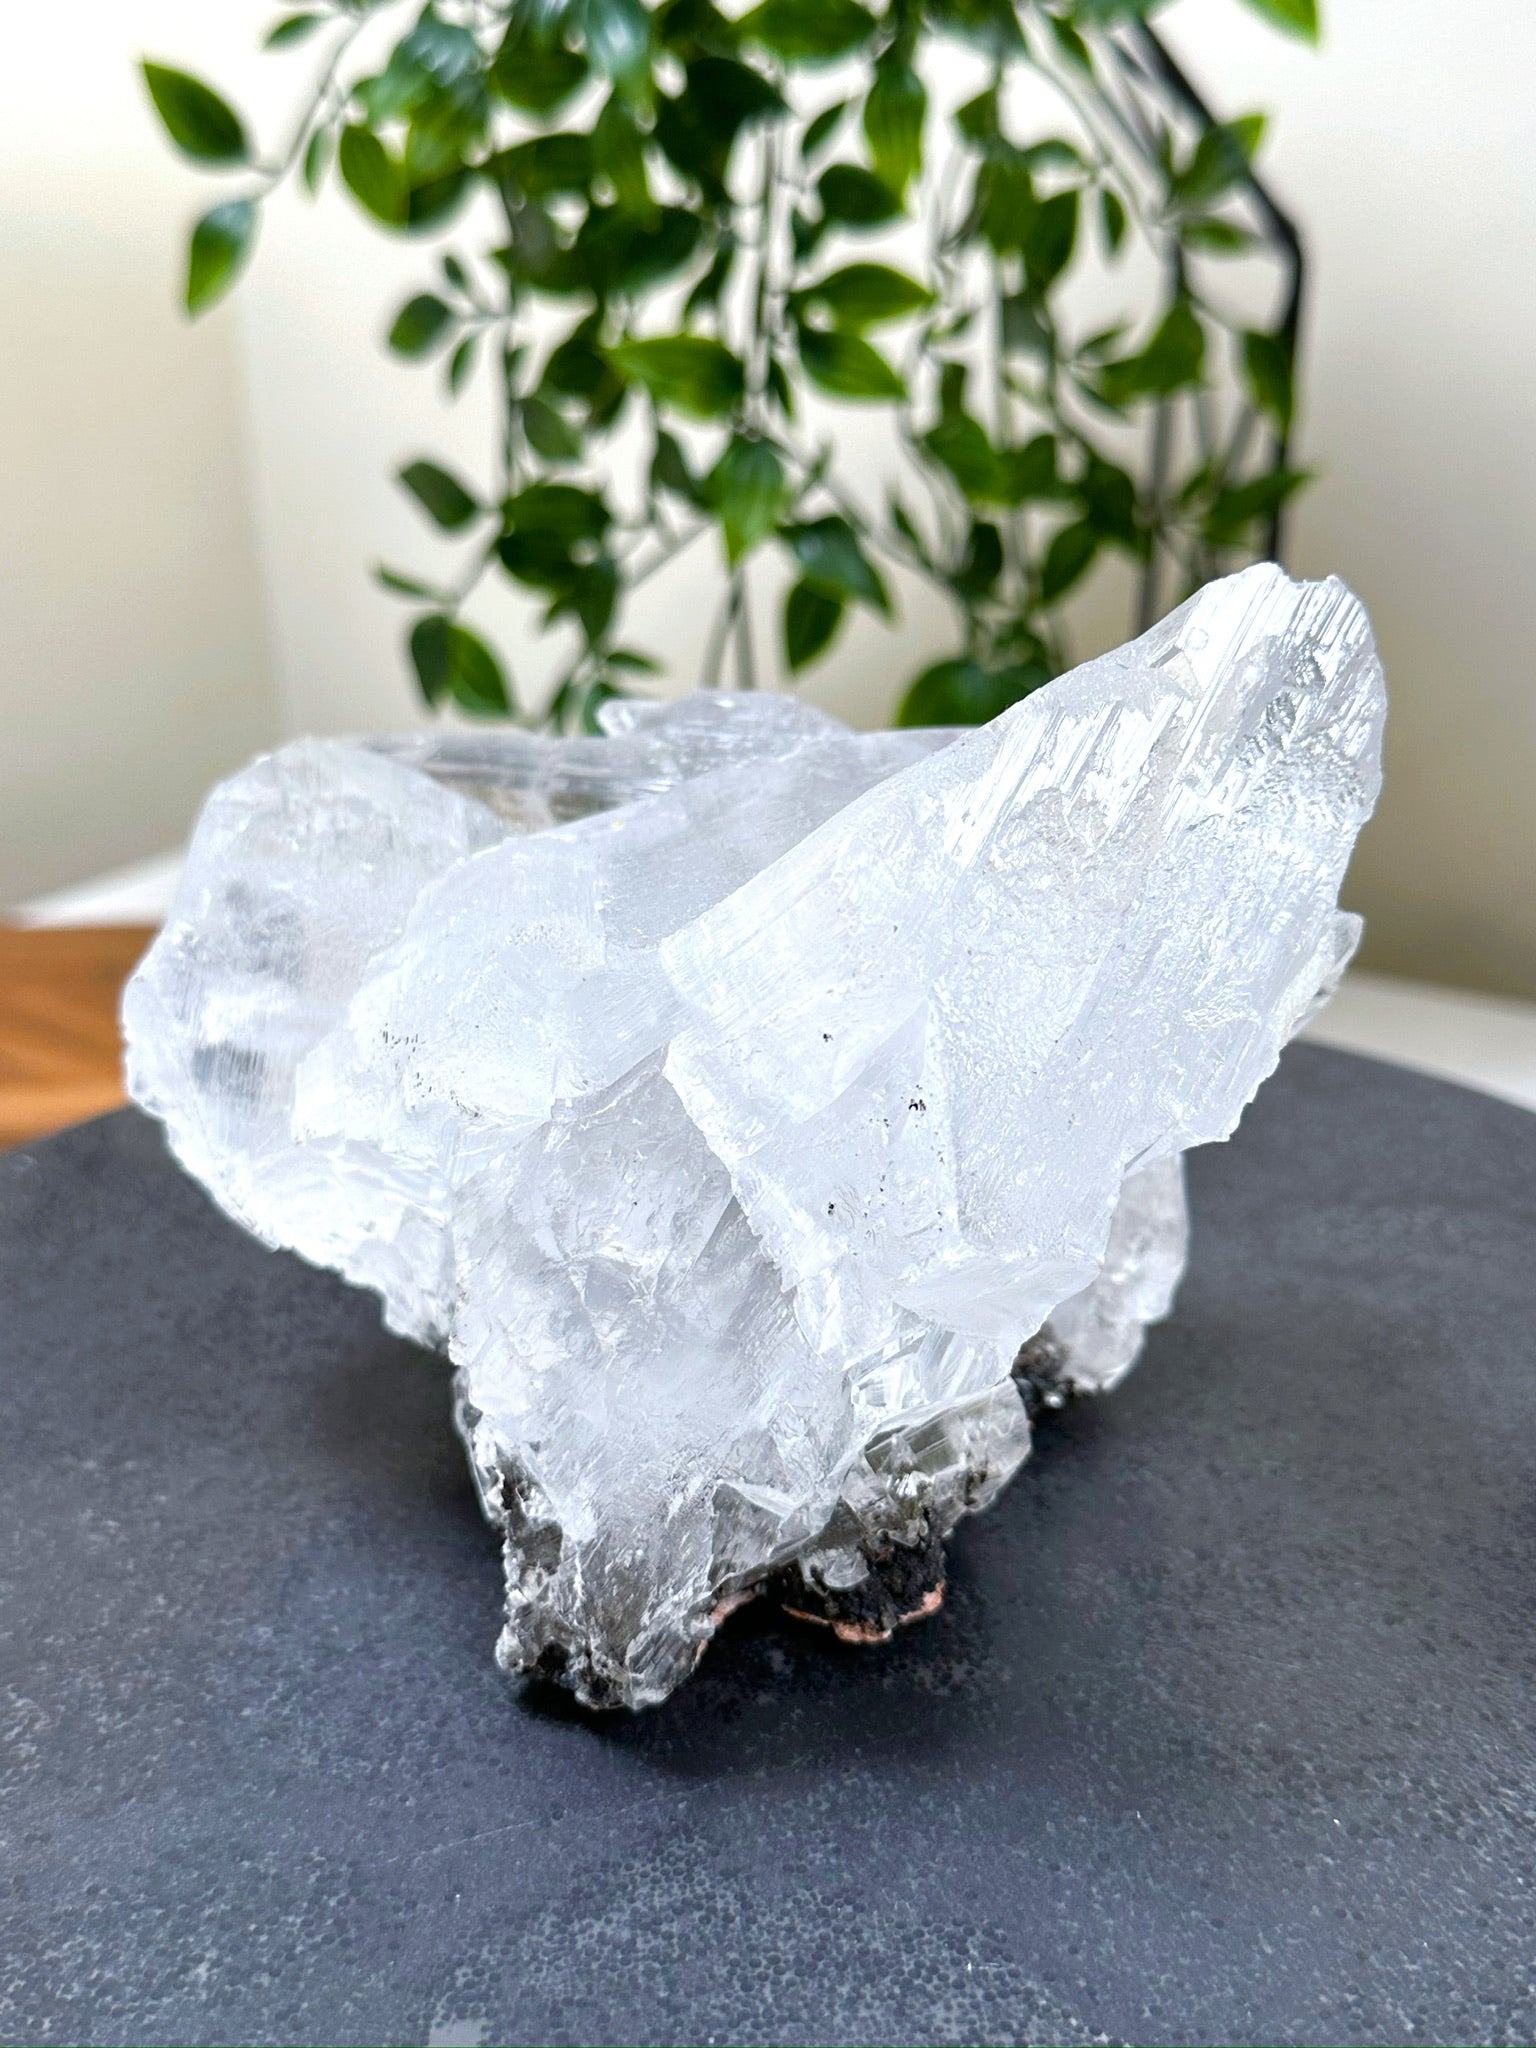 NAICA SELENITE 2 - naica mine, naica selenite, once in a blue moon, one of a kind, Recently added, selenite - The Mineral Maven